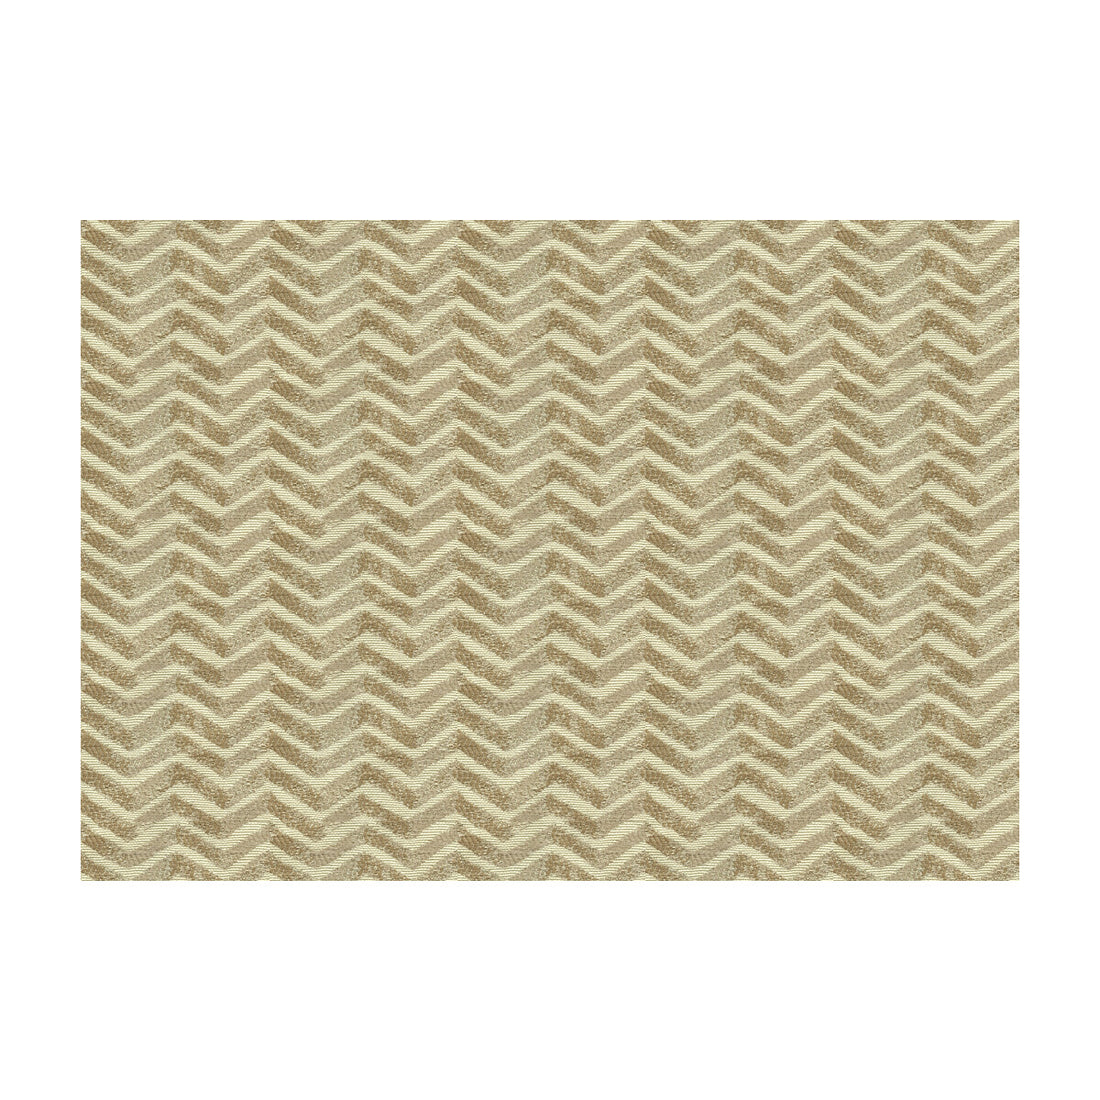 Olvera fabric in oyster color - pattern 33408.1616.0 - by Kravet Basics in the Jeffrey Alan Marks Waterside collection